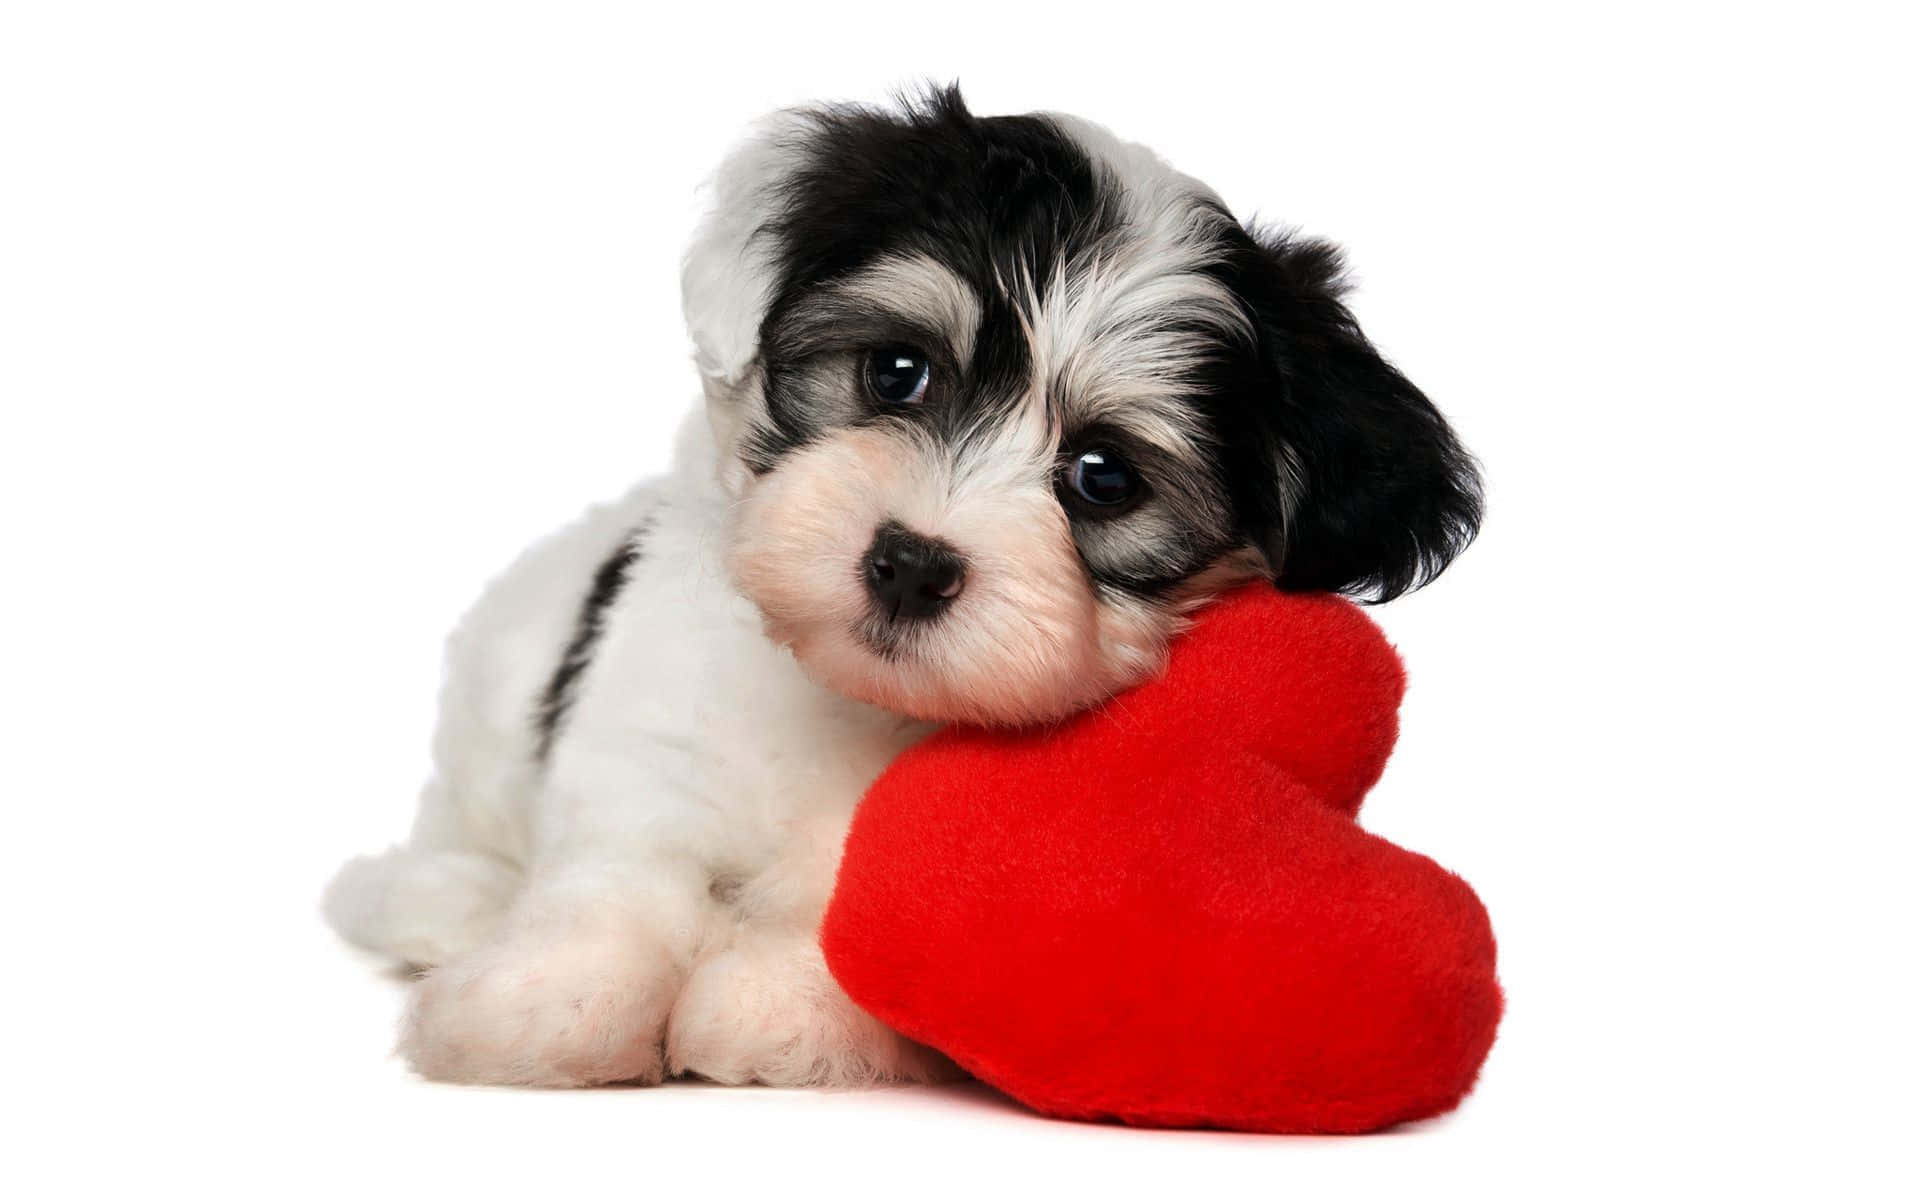 A Black And White Puppy Holding A Red Heart Shaped Pillow